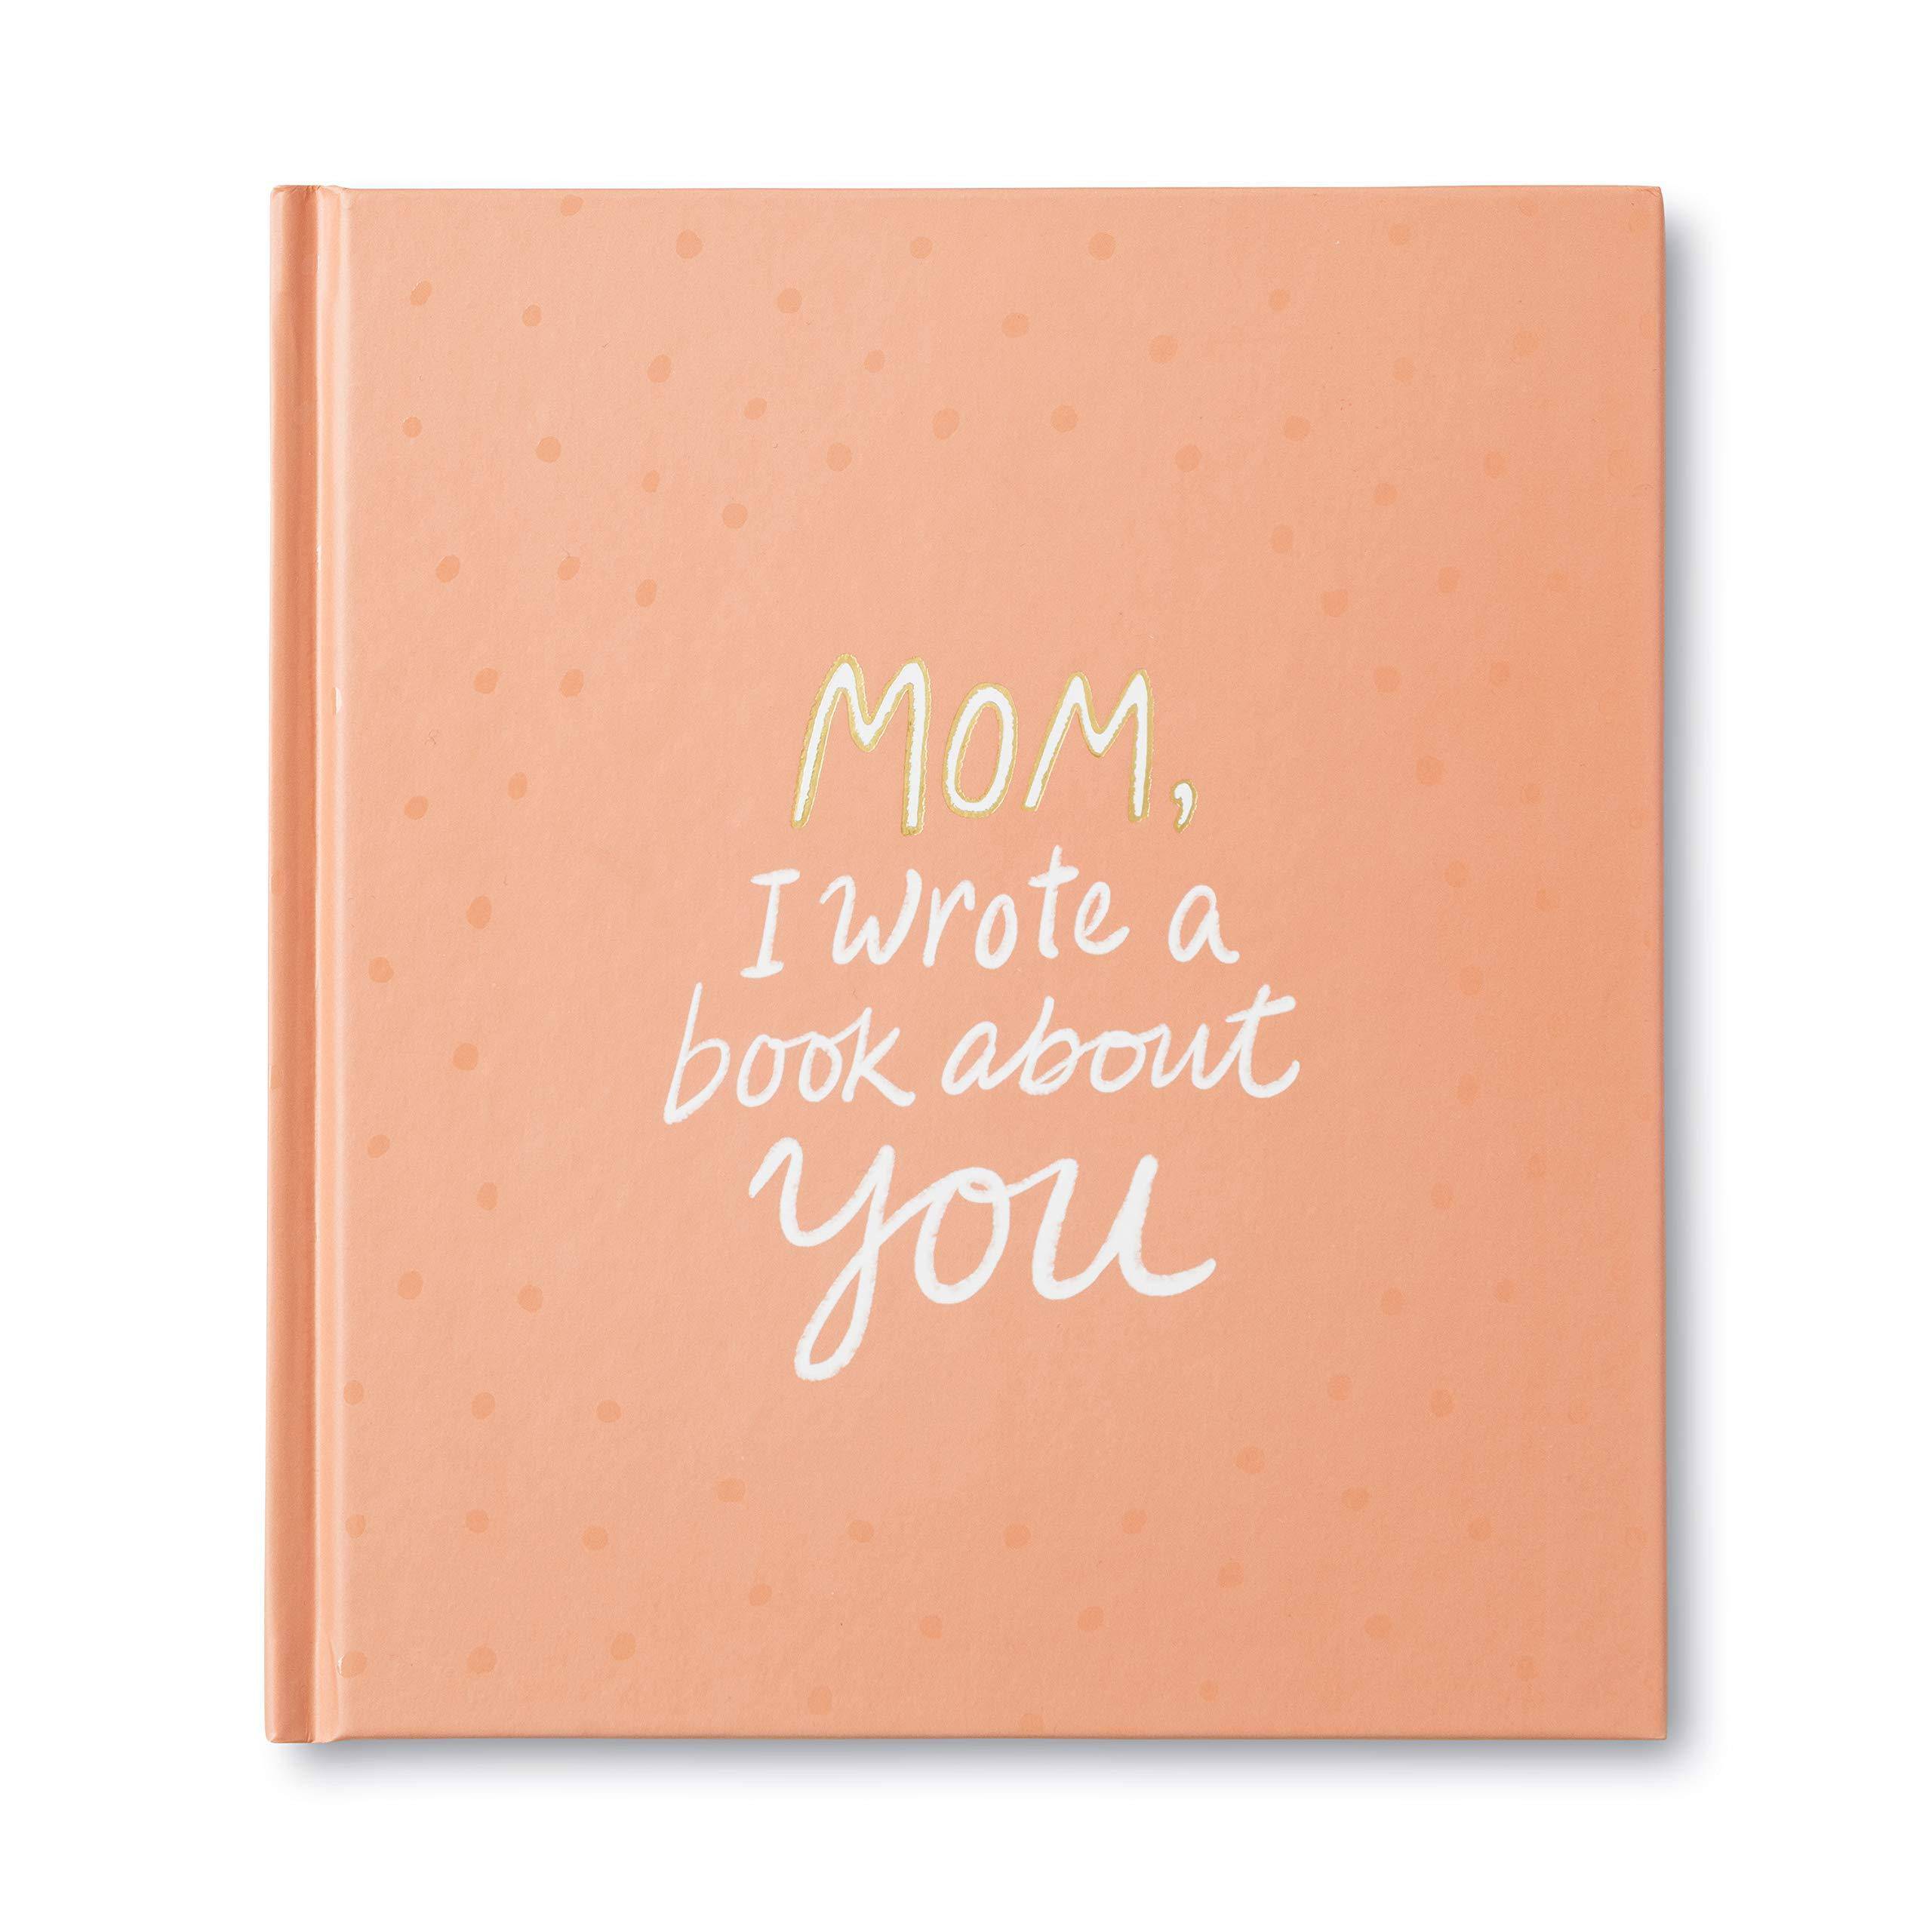 Mom, I Wrote a Book About You - SureShot Books Publishing LLC